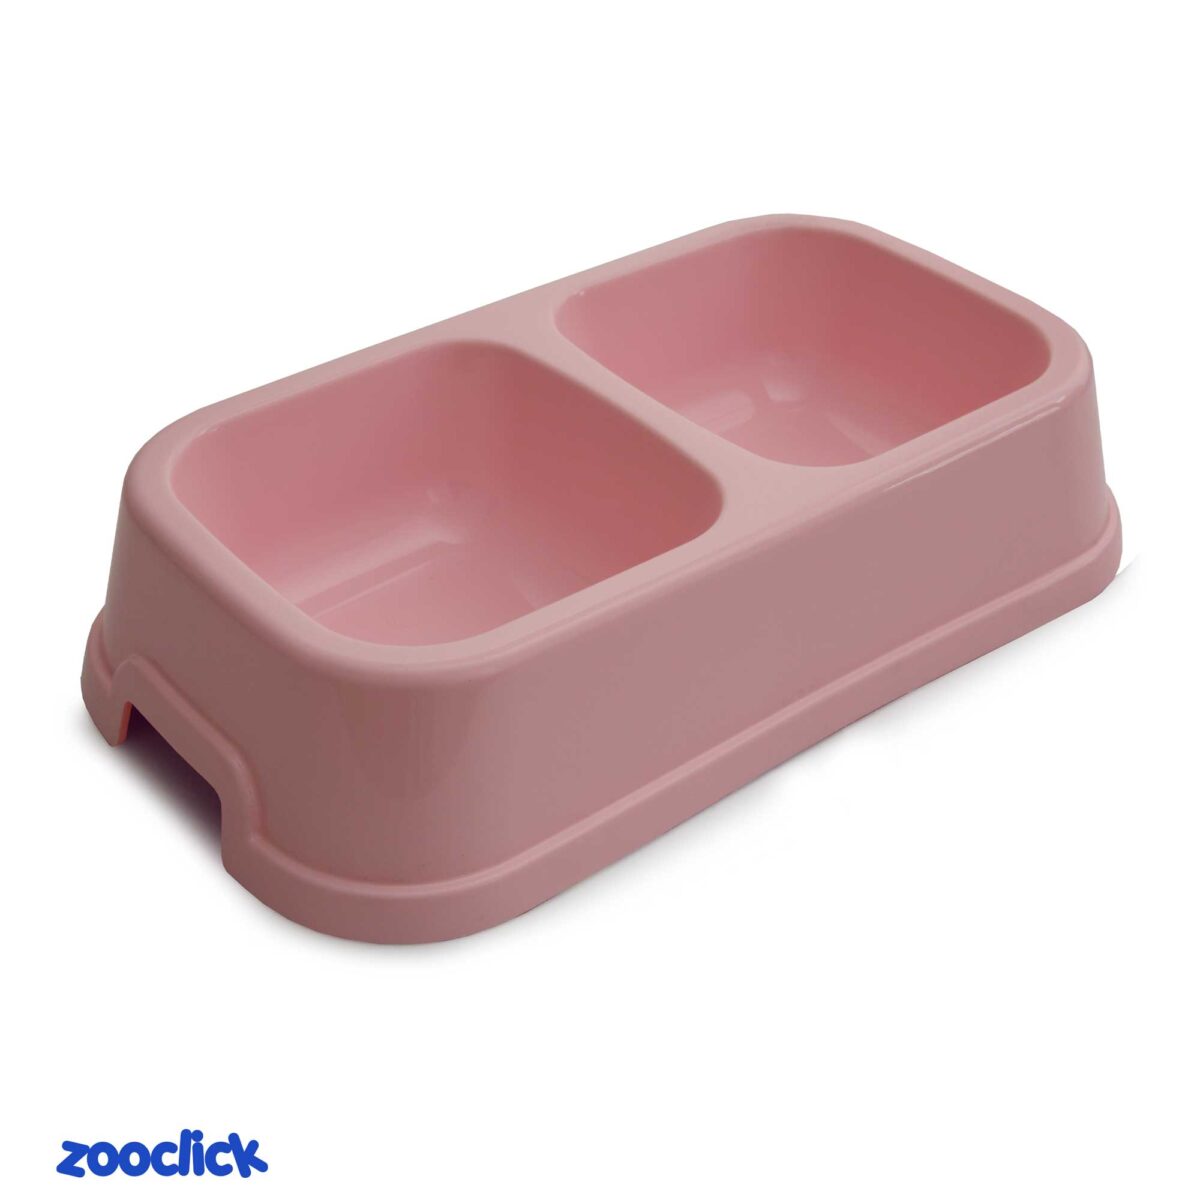 zc-romito-double-dishes-for-dog-cat-110-01